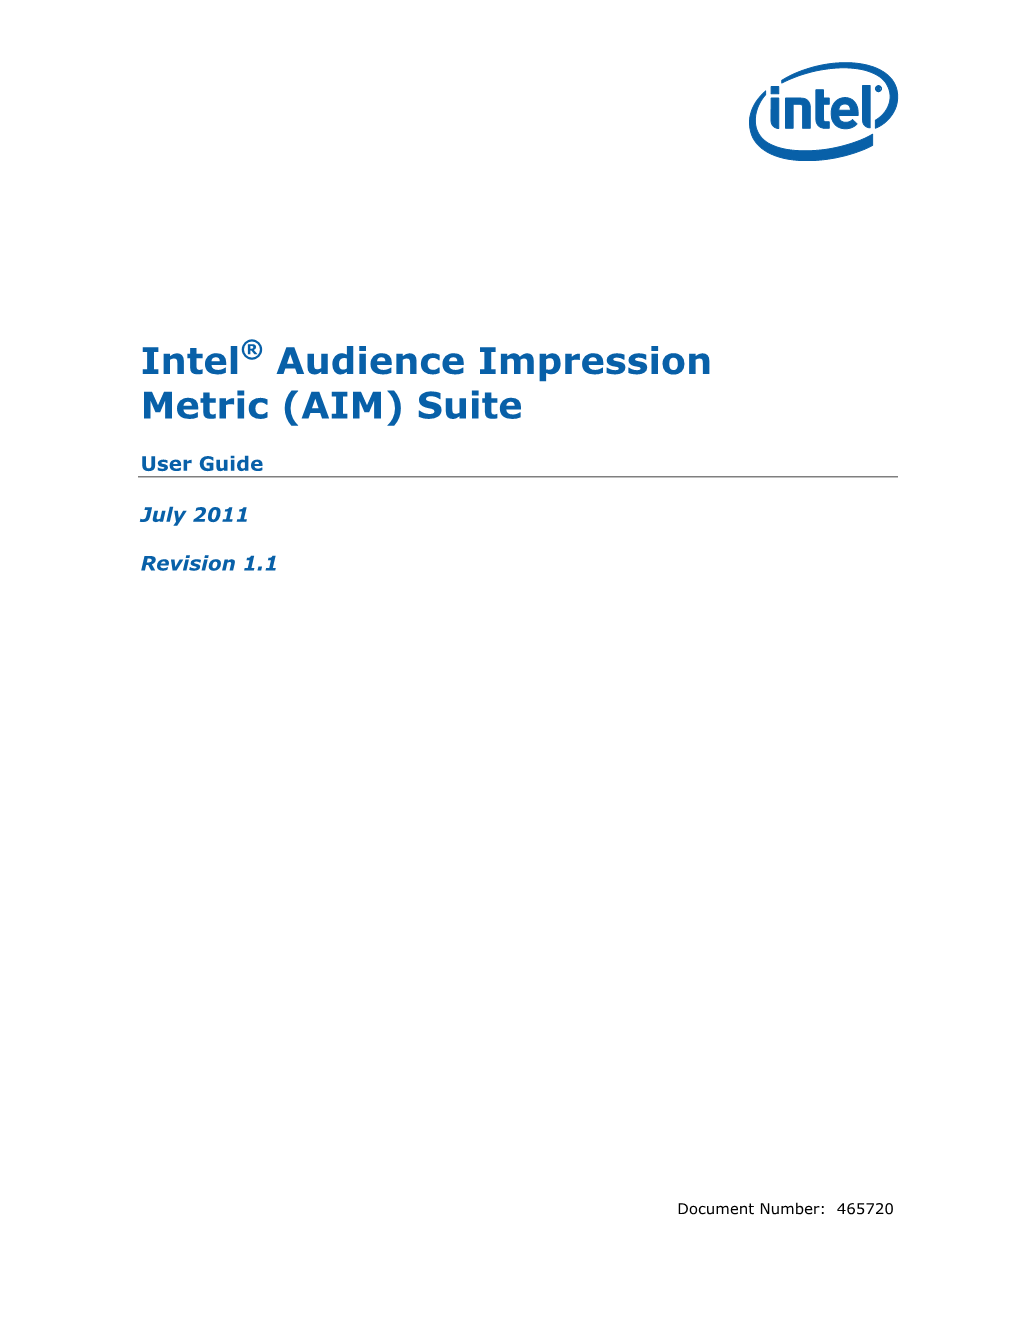 Intel® Audience Impression Metric (AIM) Suite User Guide July 2011 2 Document Number: 465720-1.1